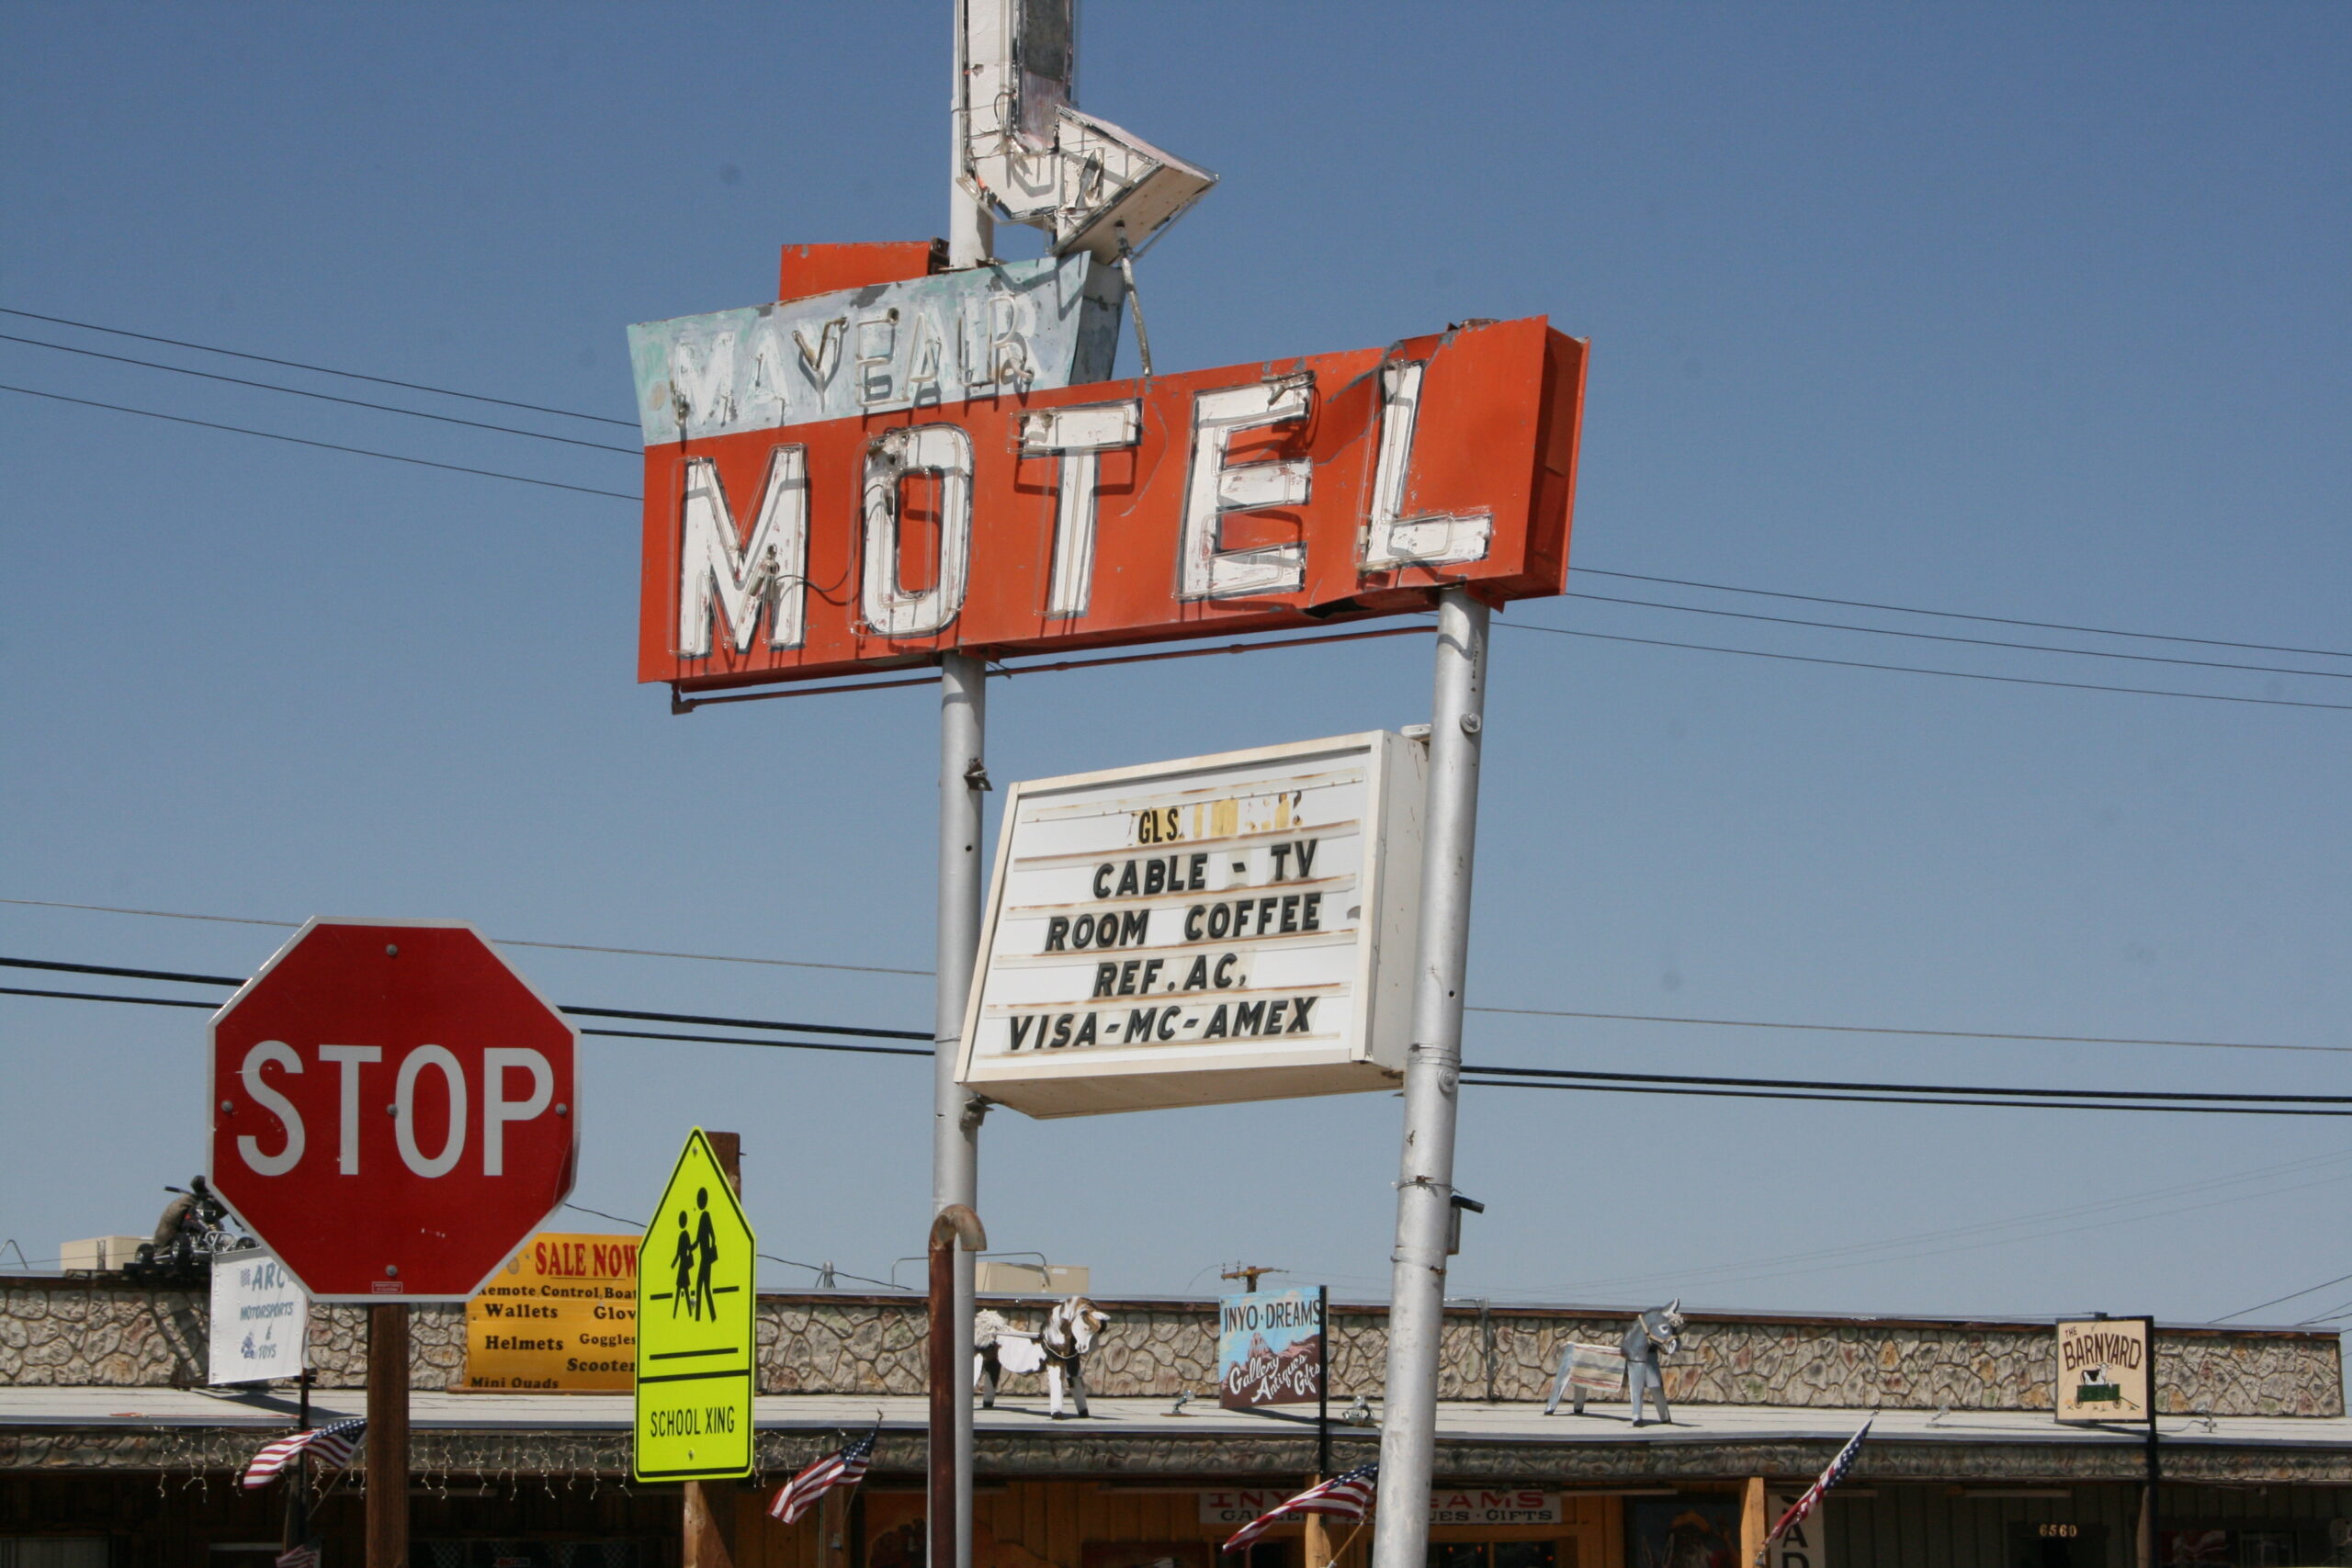 The condemned Mayfair Motel in Ridgecrest, California